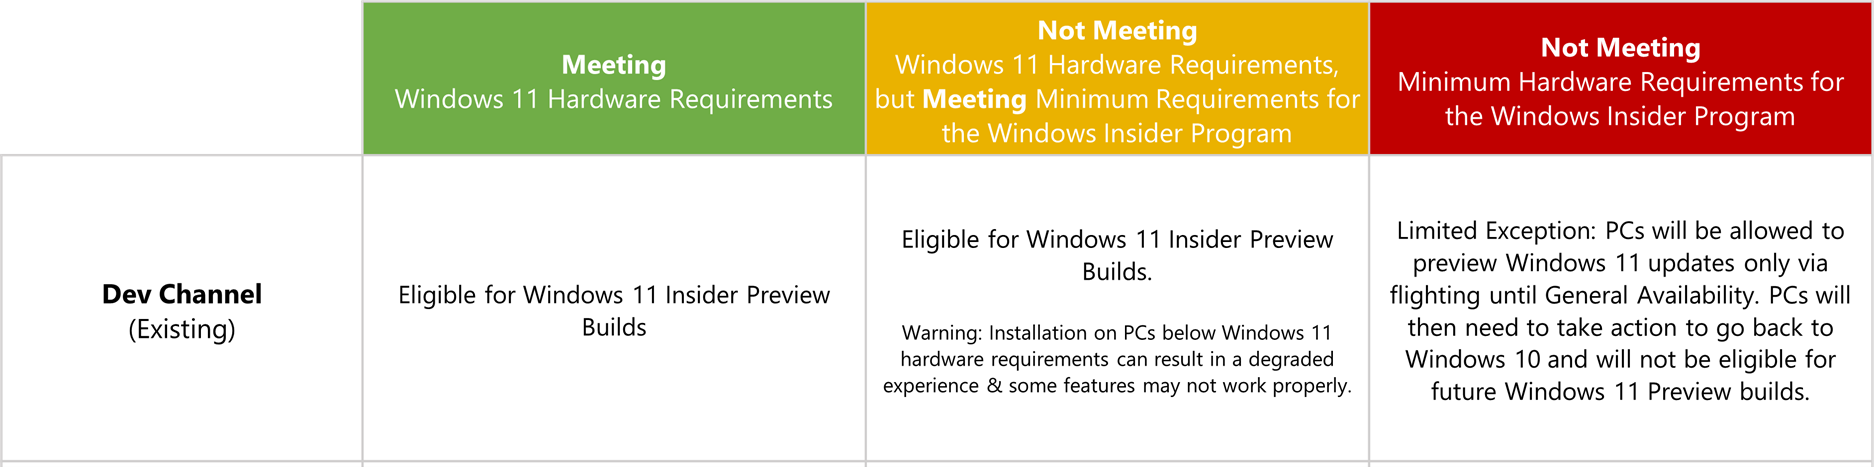 Chart outlining Windows 11 hardware requirements in the Dev Channel.